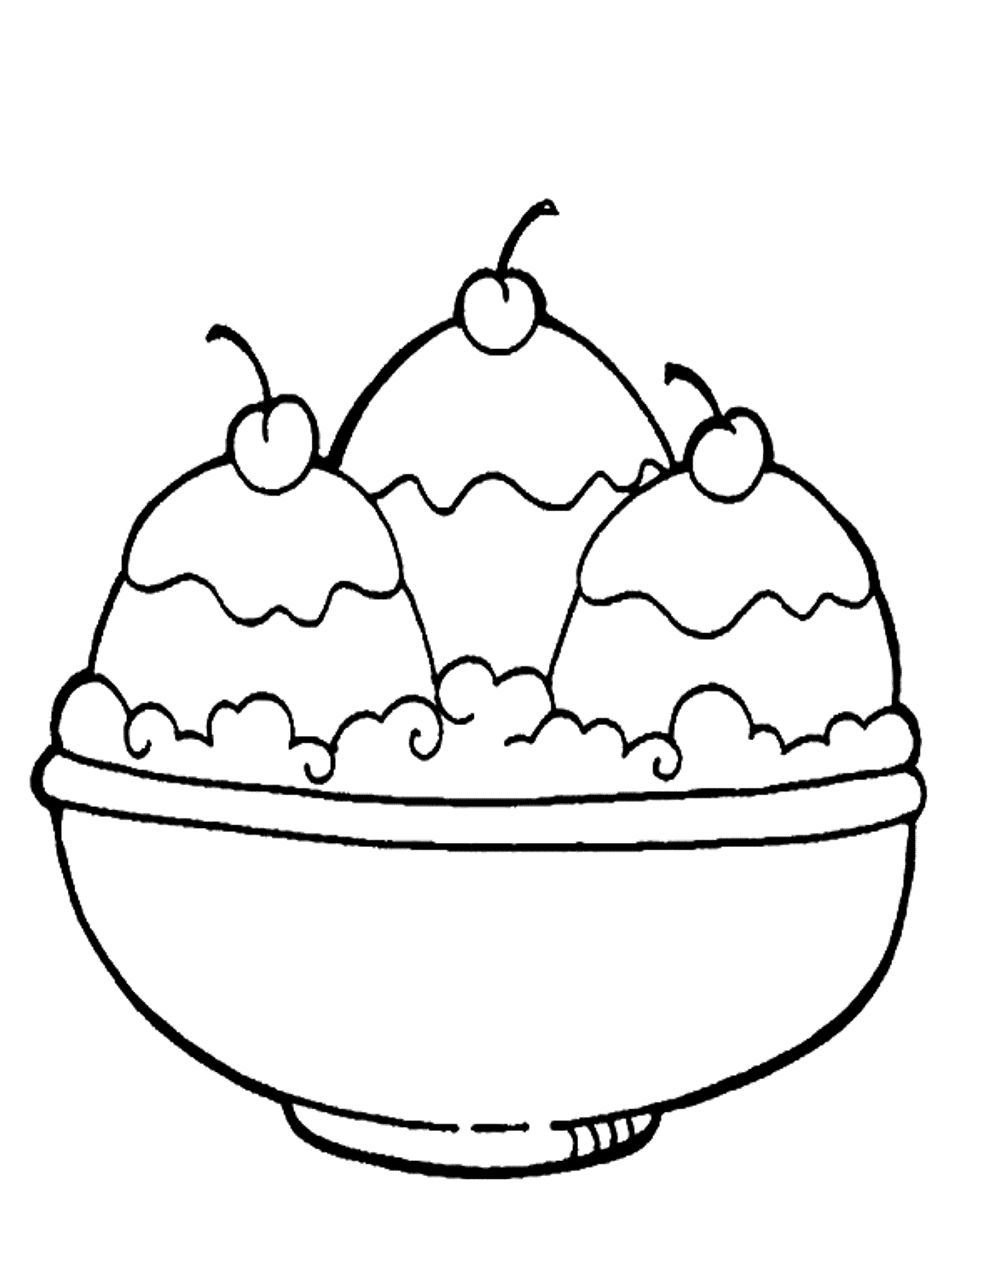 Sundae Ice Cream Coloring Pages | Foods Coloring pages of ...